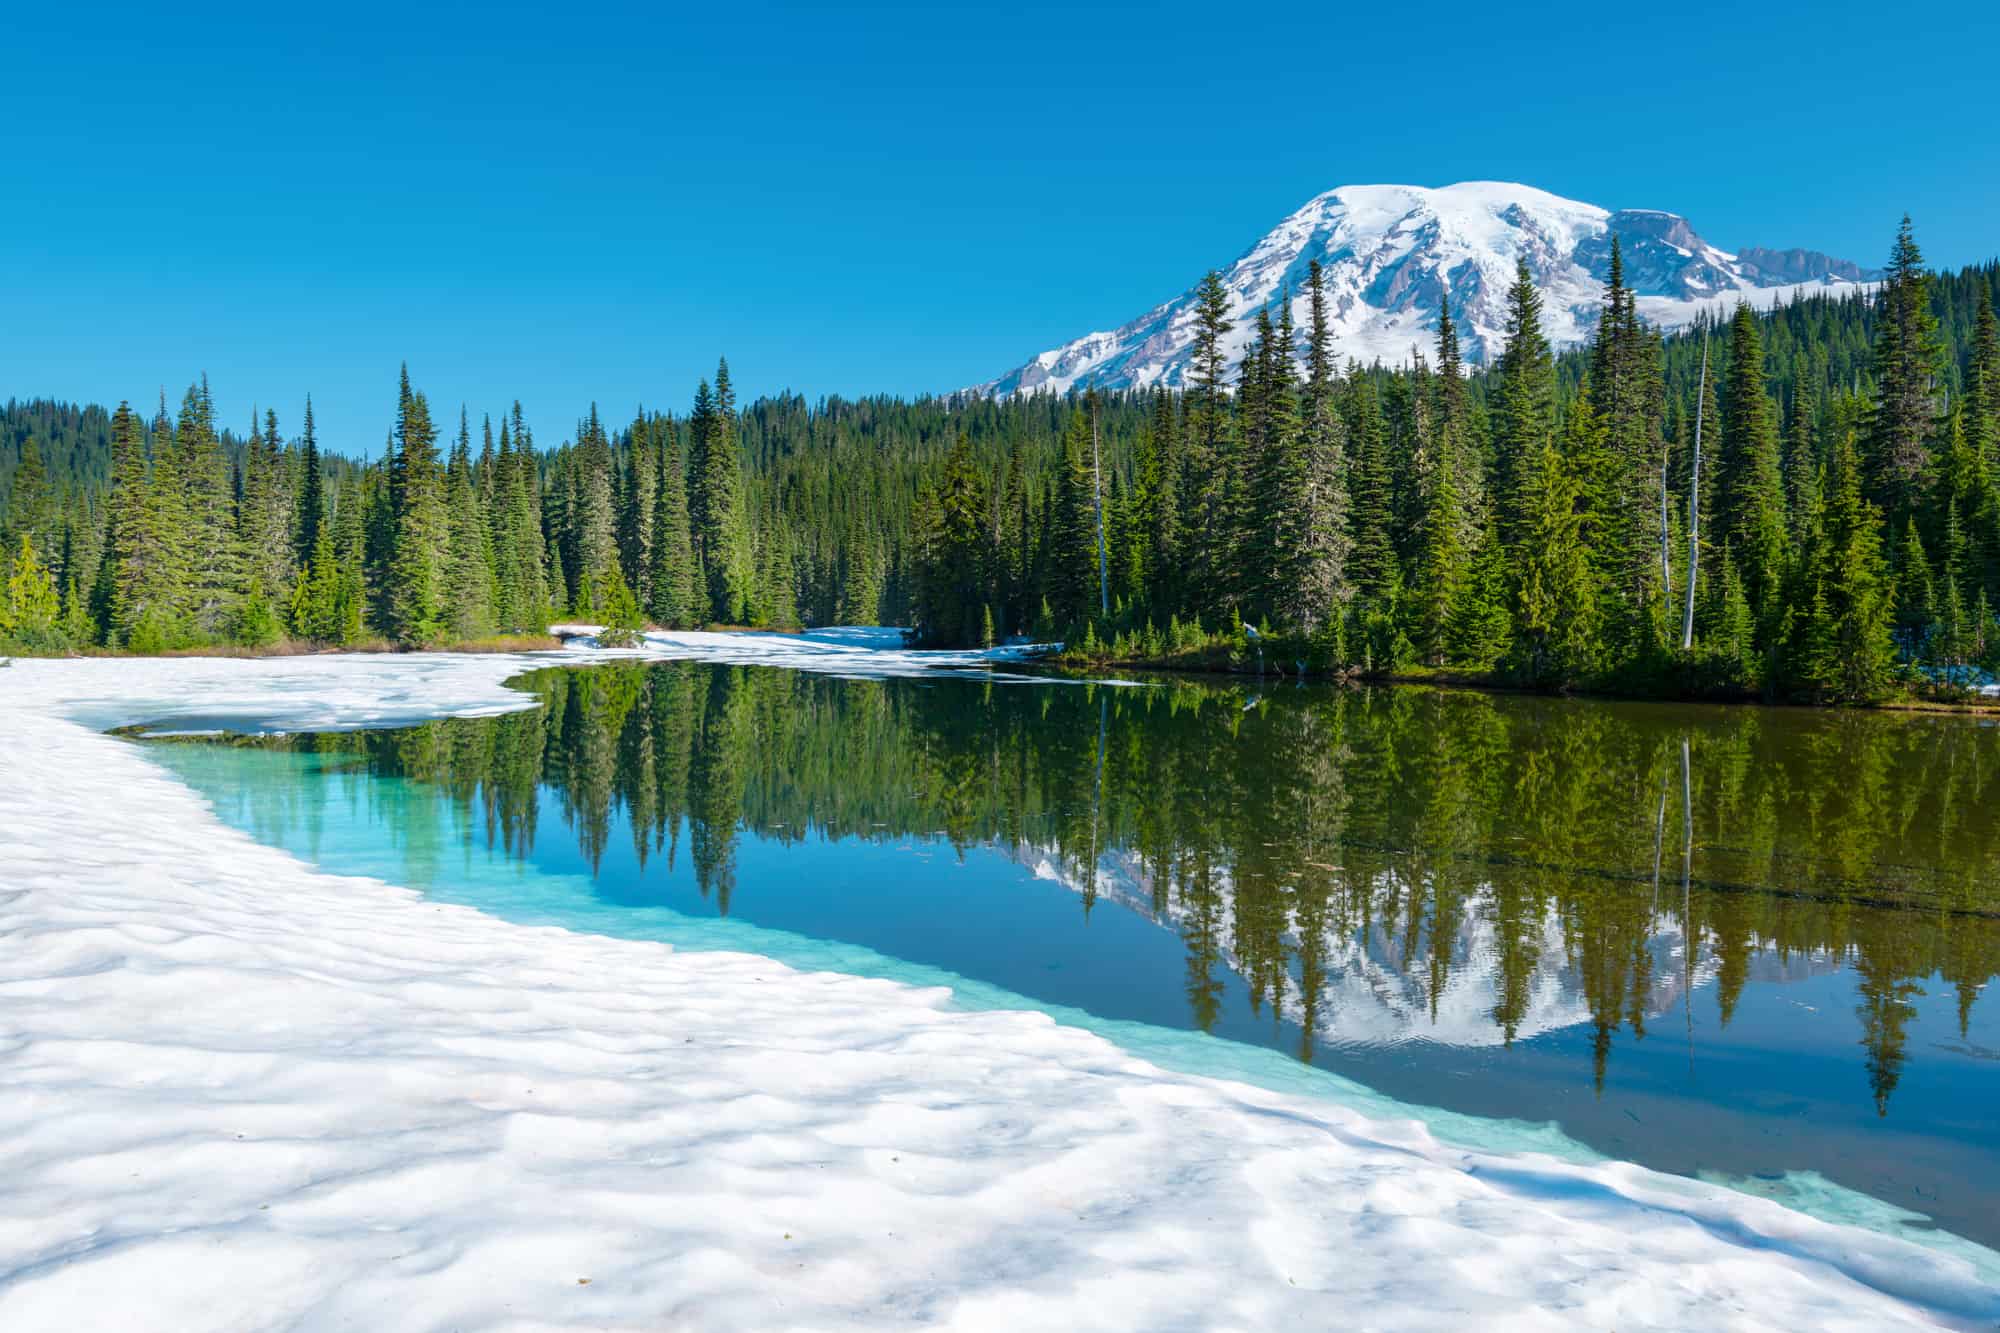 snow sits along the shore at reflection lake with trees and mount rainier in the background, melting snow is the order of the day in mount rainier in spring